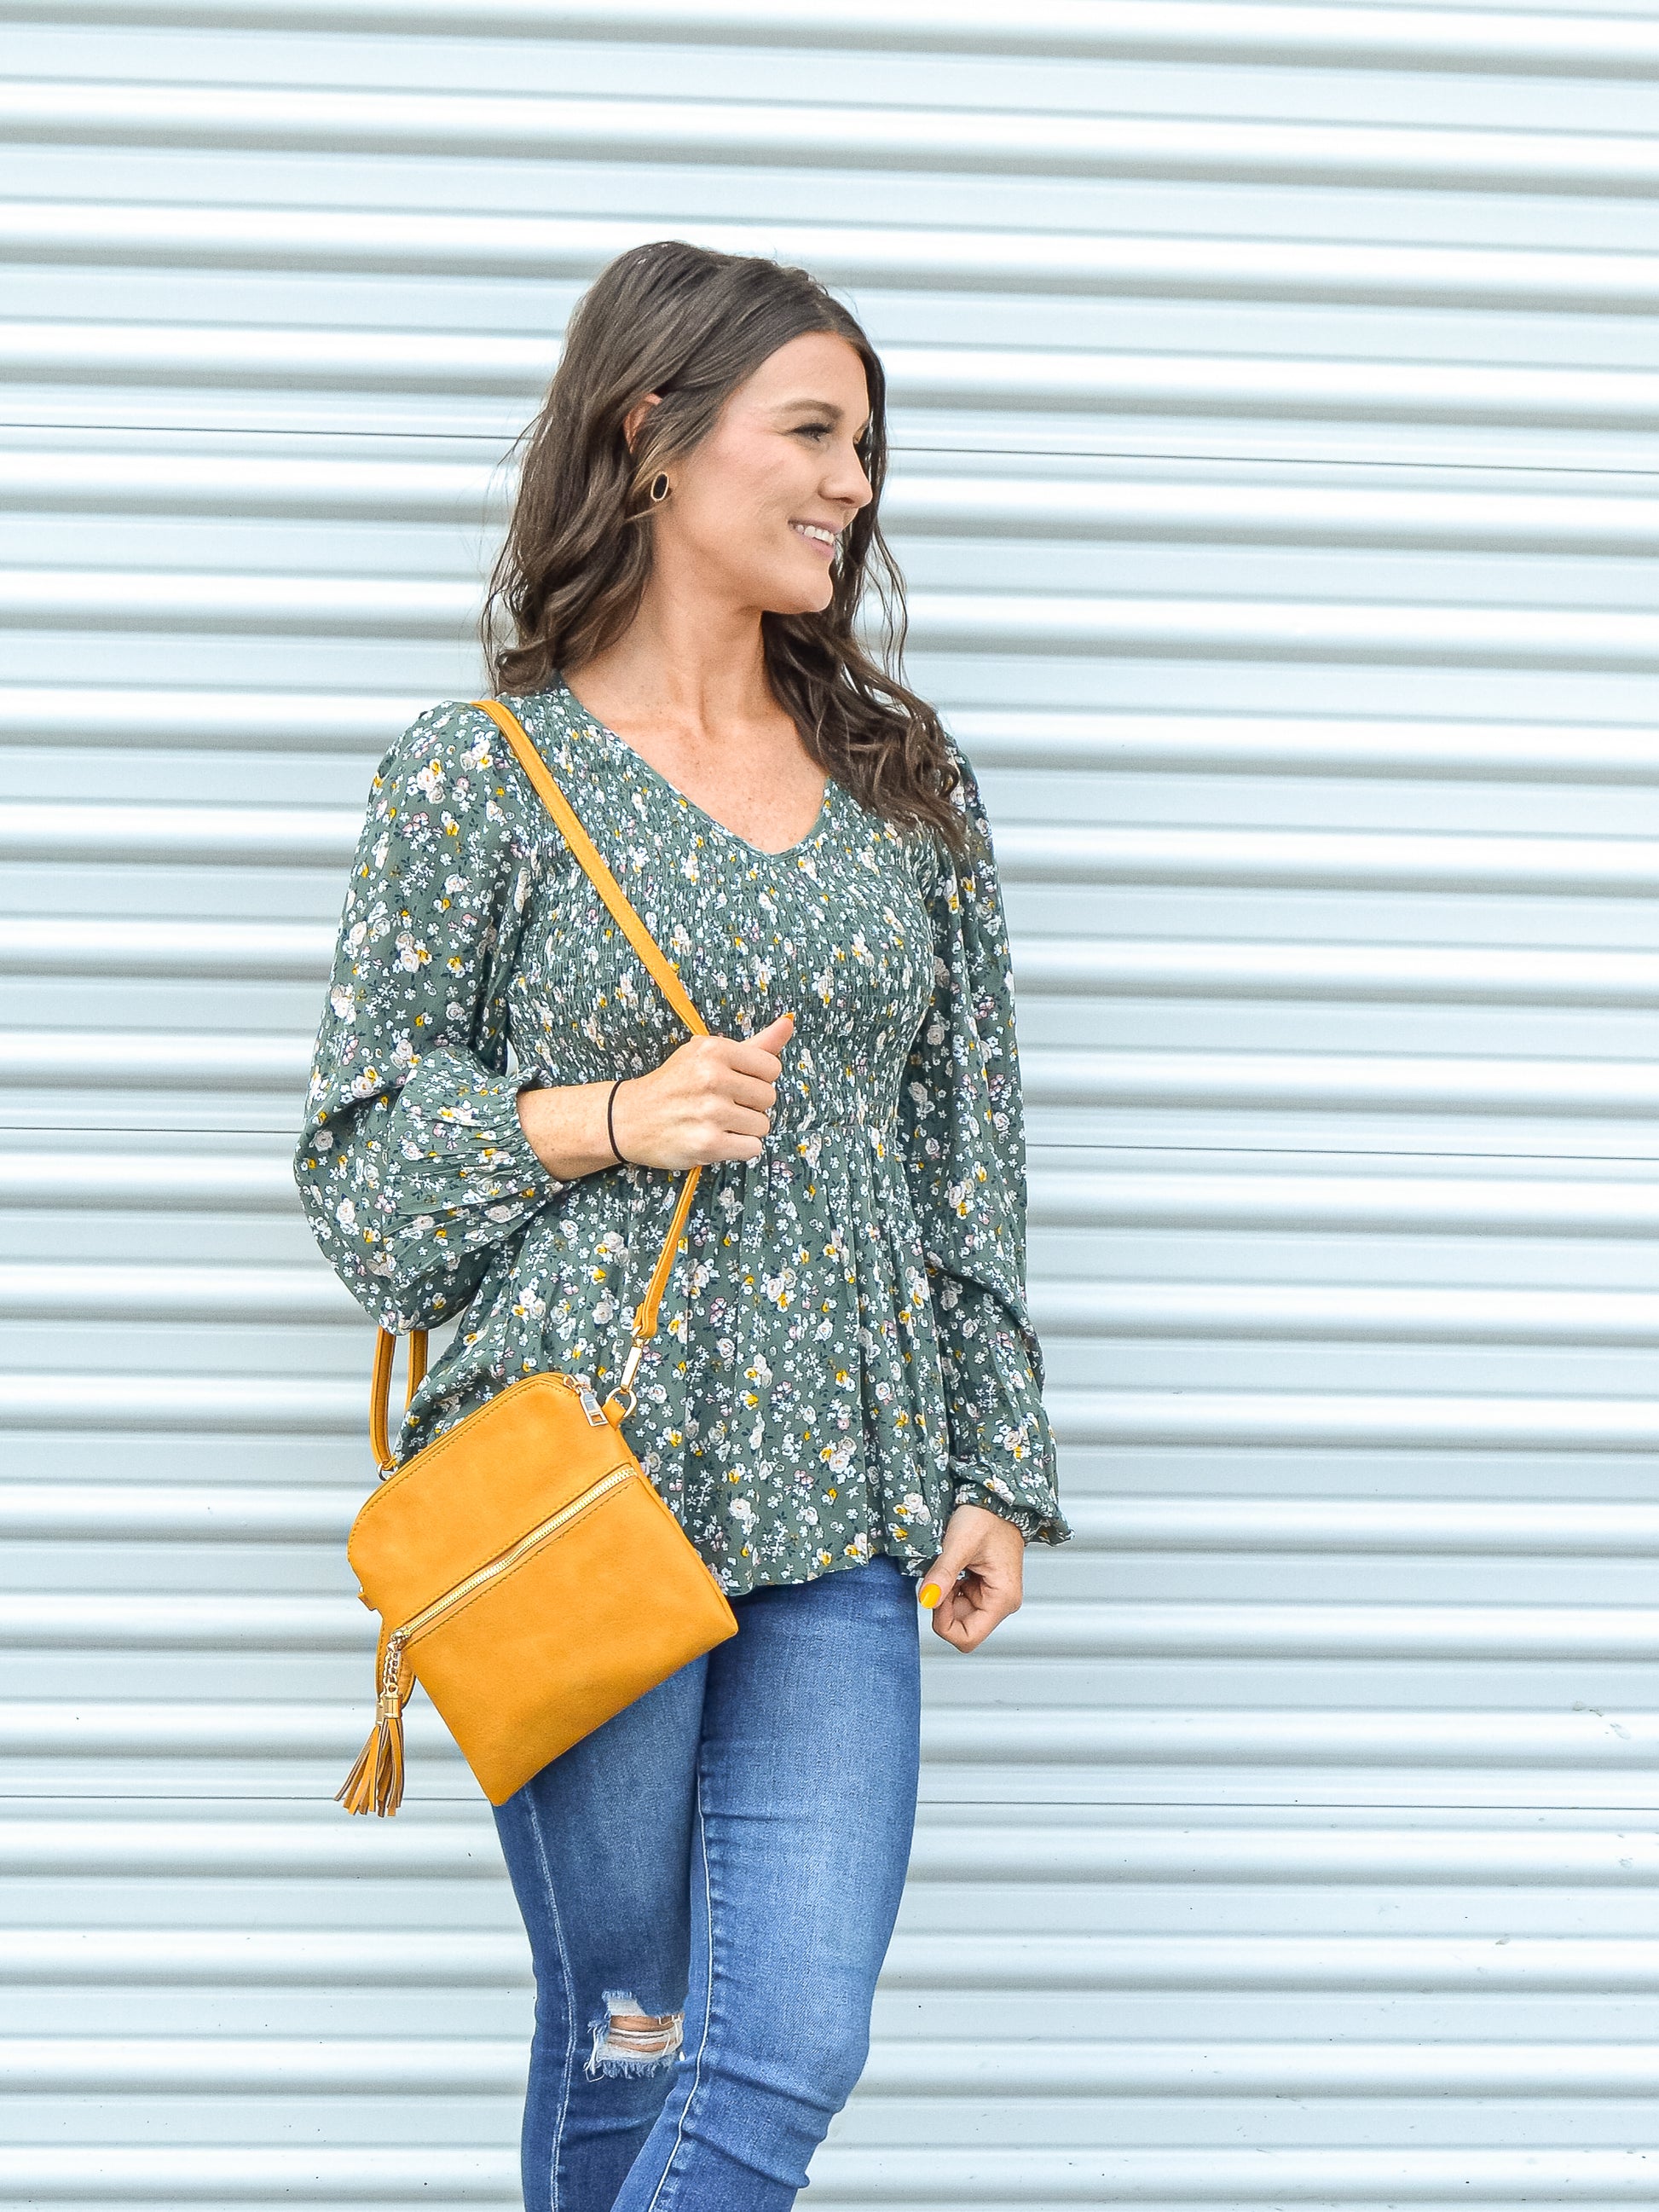 Green floral baby doll top paired with jeans and a purse